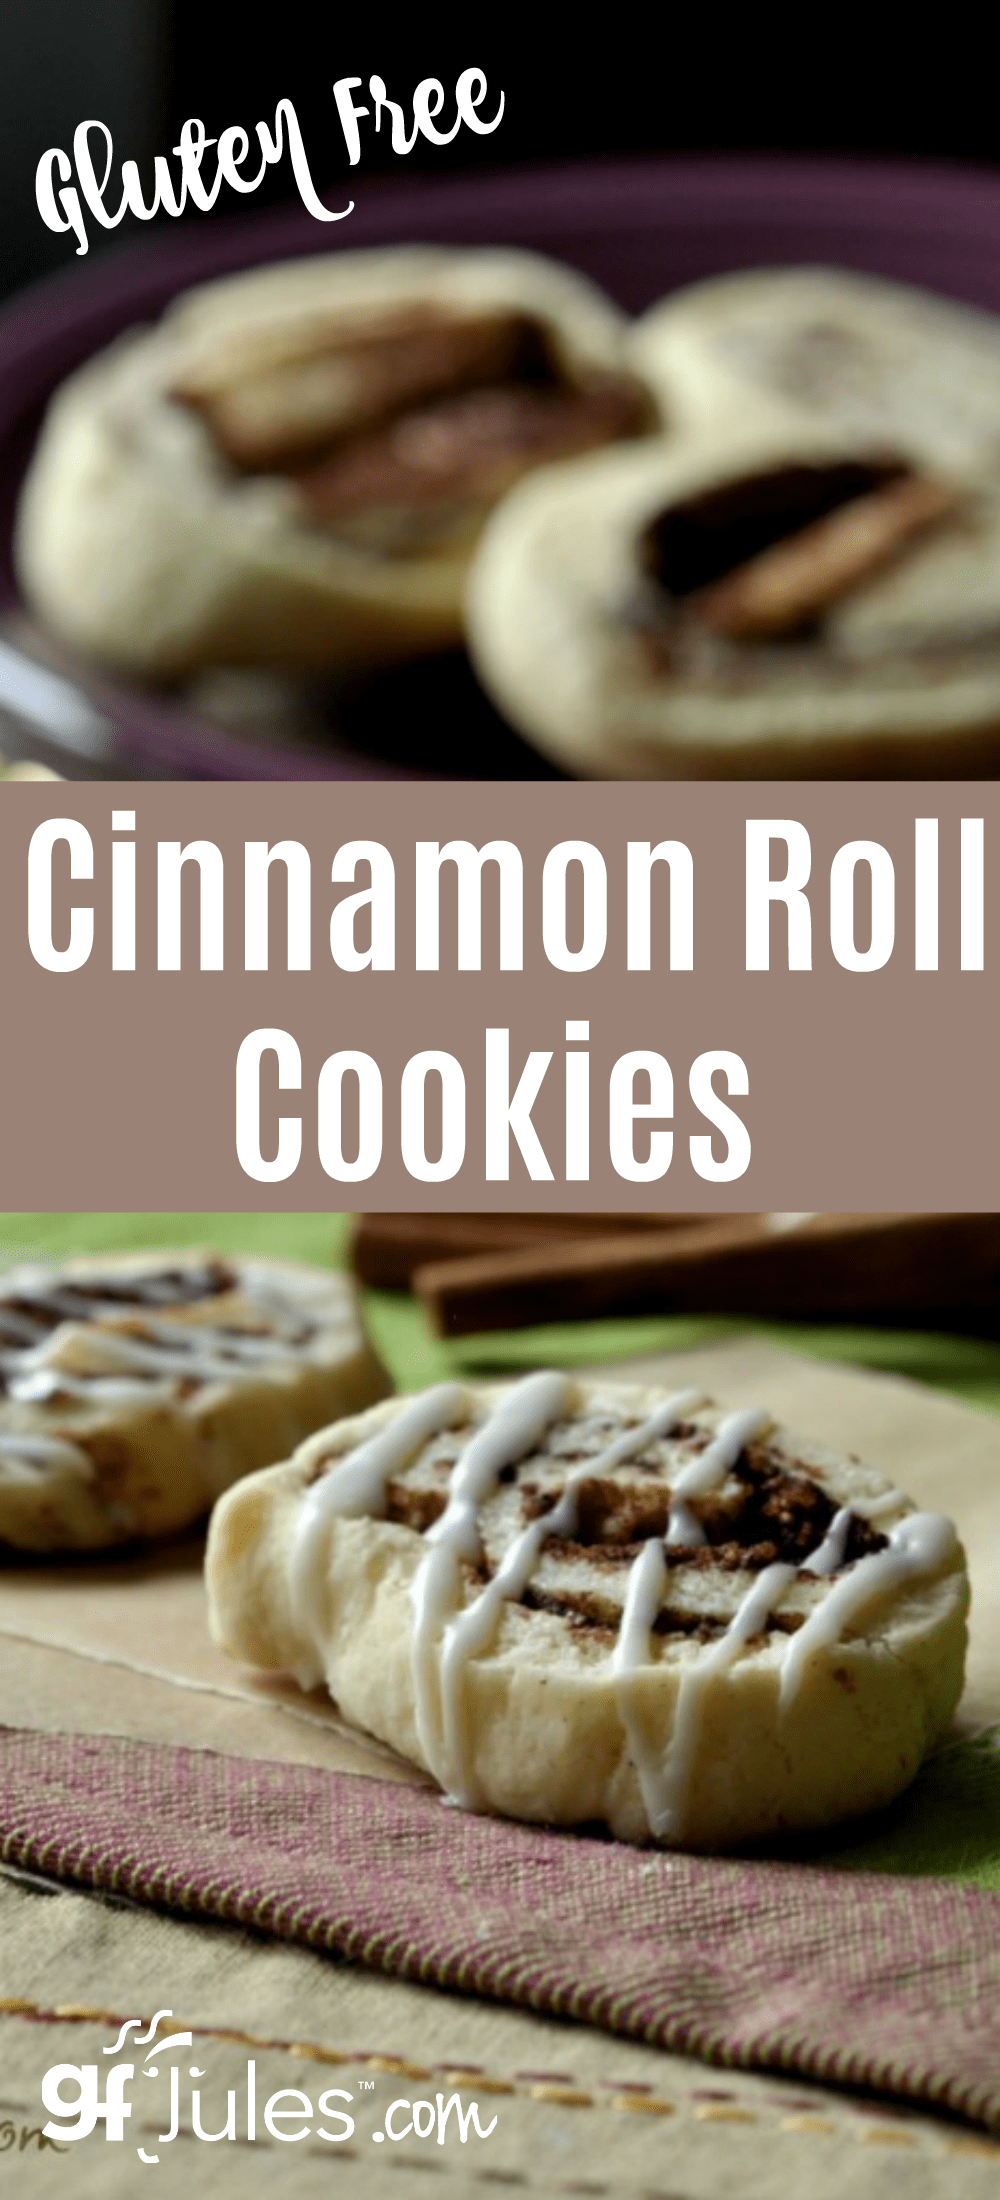 Gluten Free Cinnamon Roll CookieThese little gems melt in your mouth just like miniature cinnamon rolls, but take a lot less time to prepare and are easier to carry in lunch boxes!